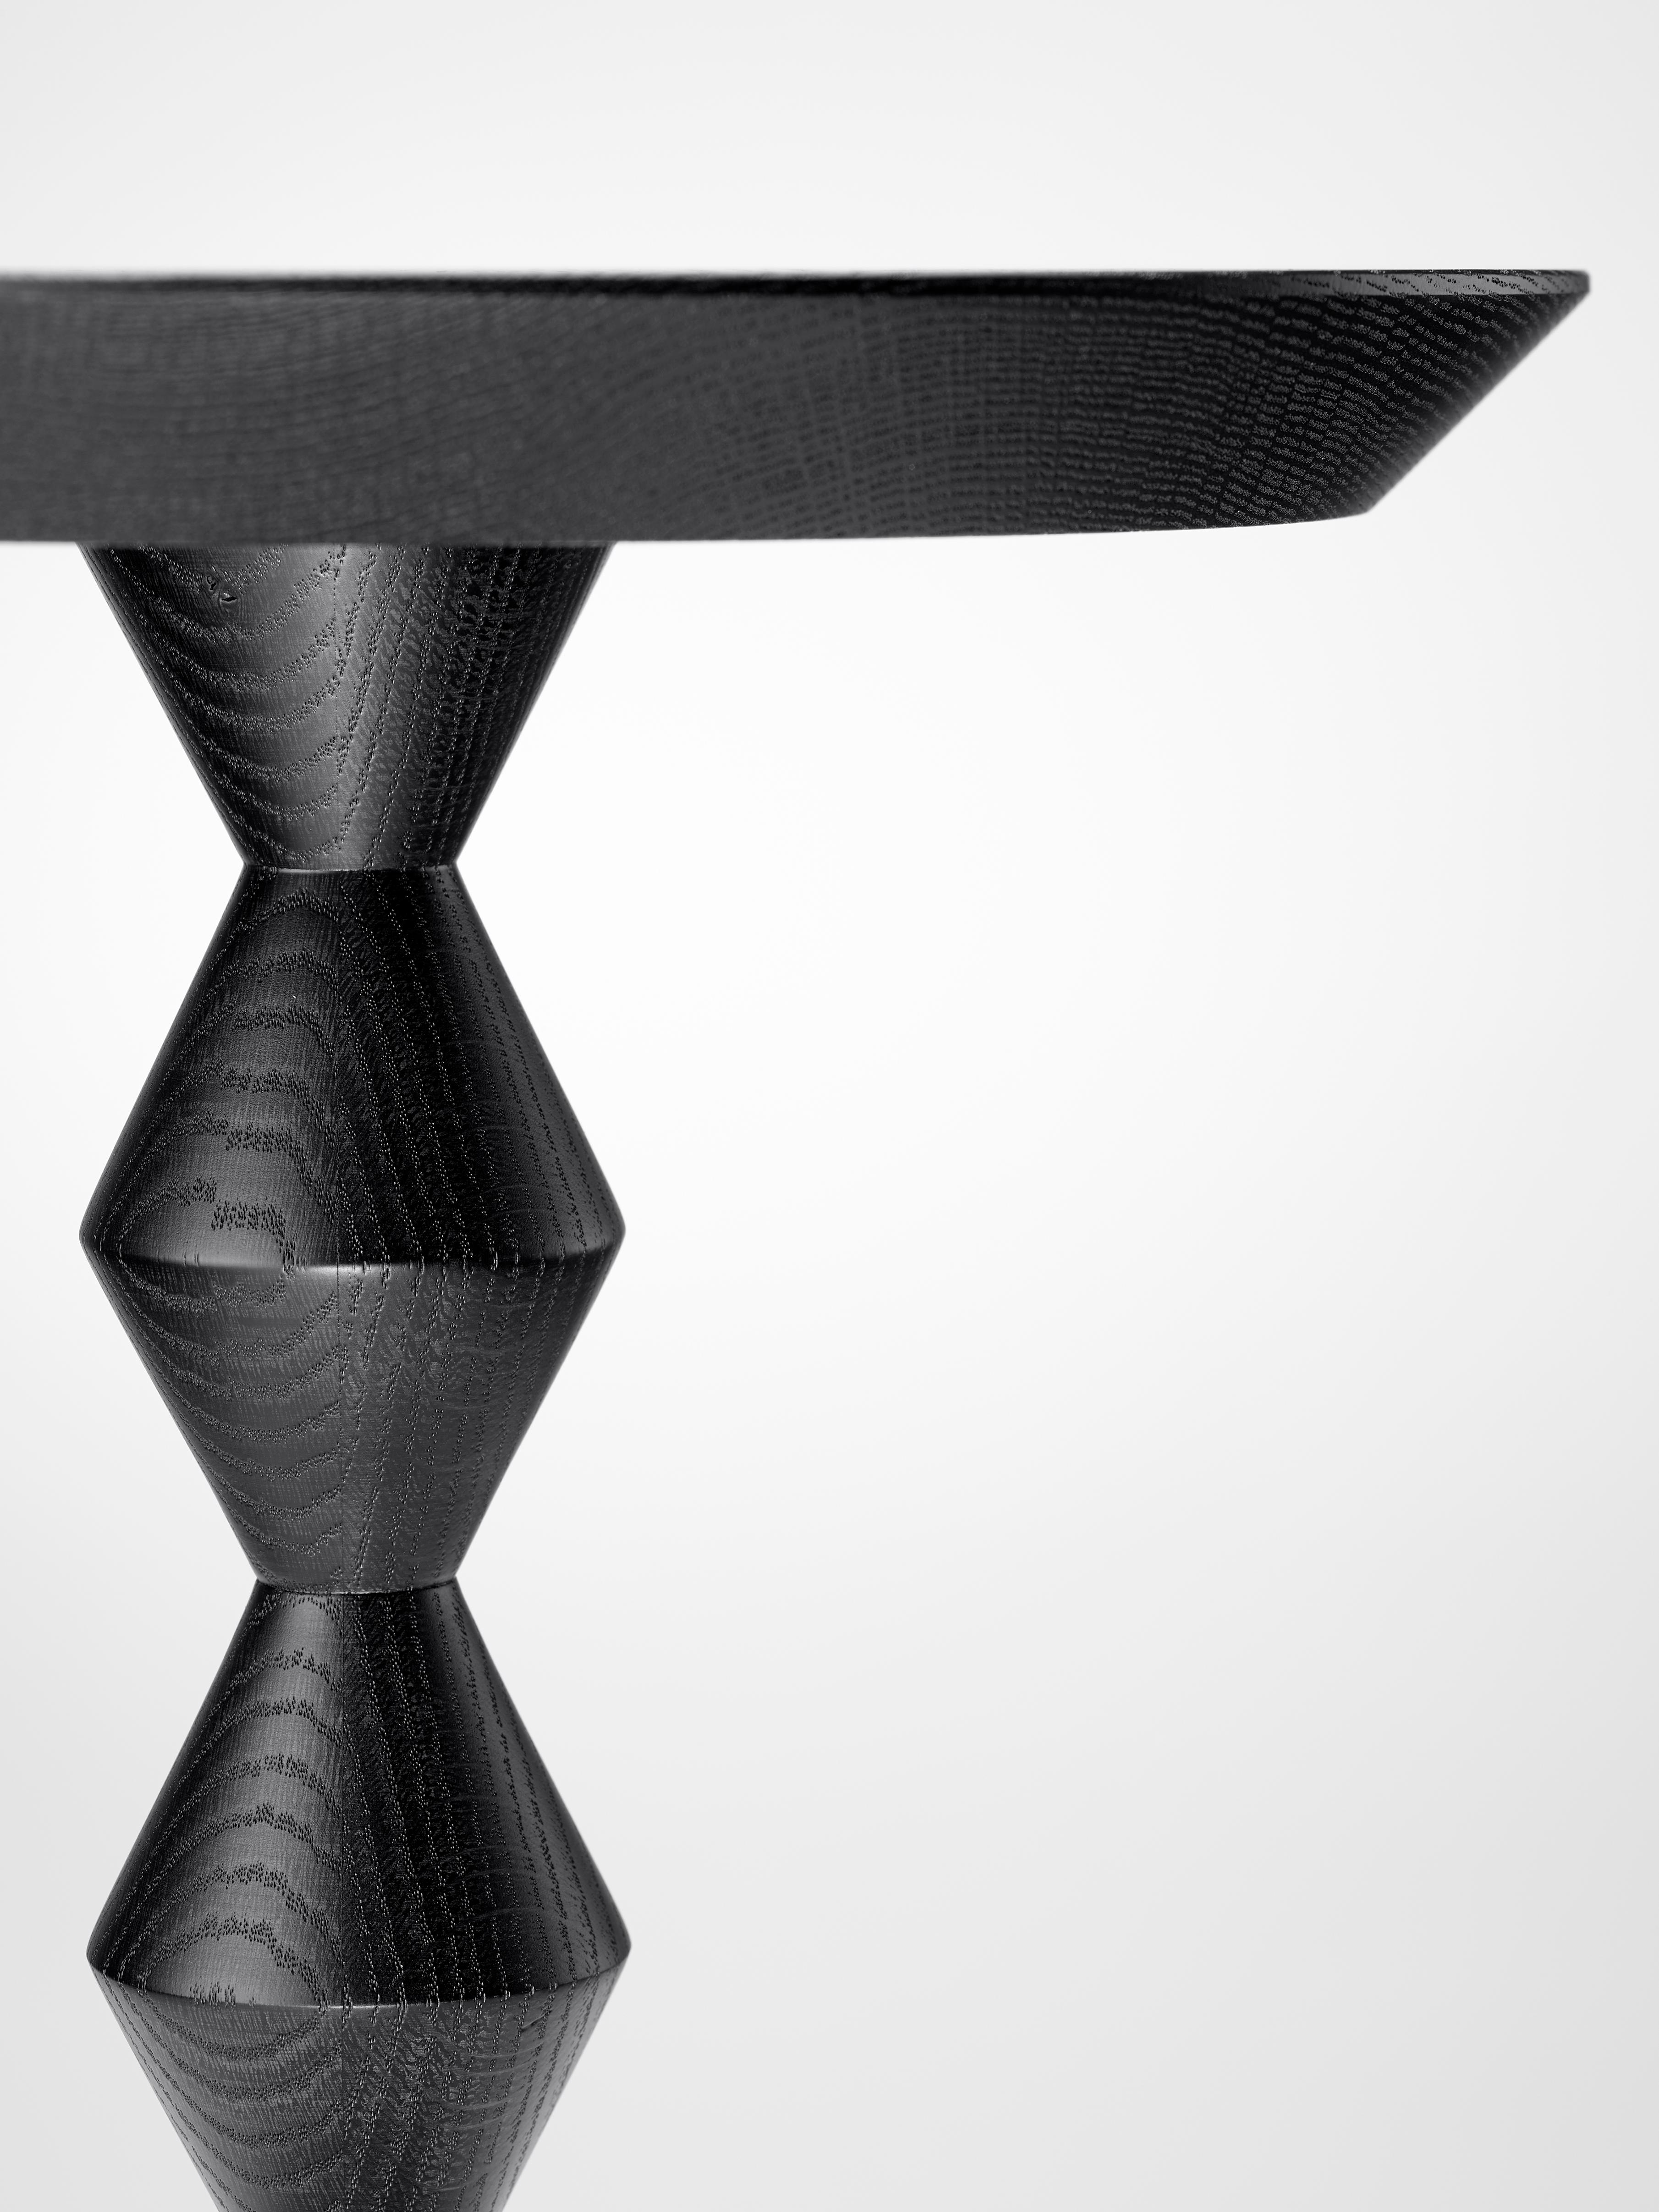 English Contemporary Zic-Zac Occasional Table in Oak or Walnut expertly lathe turned For Sale